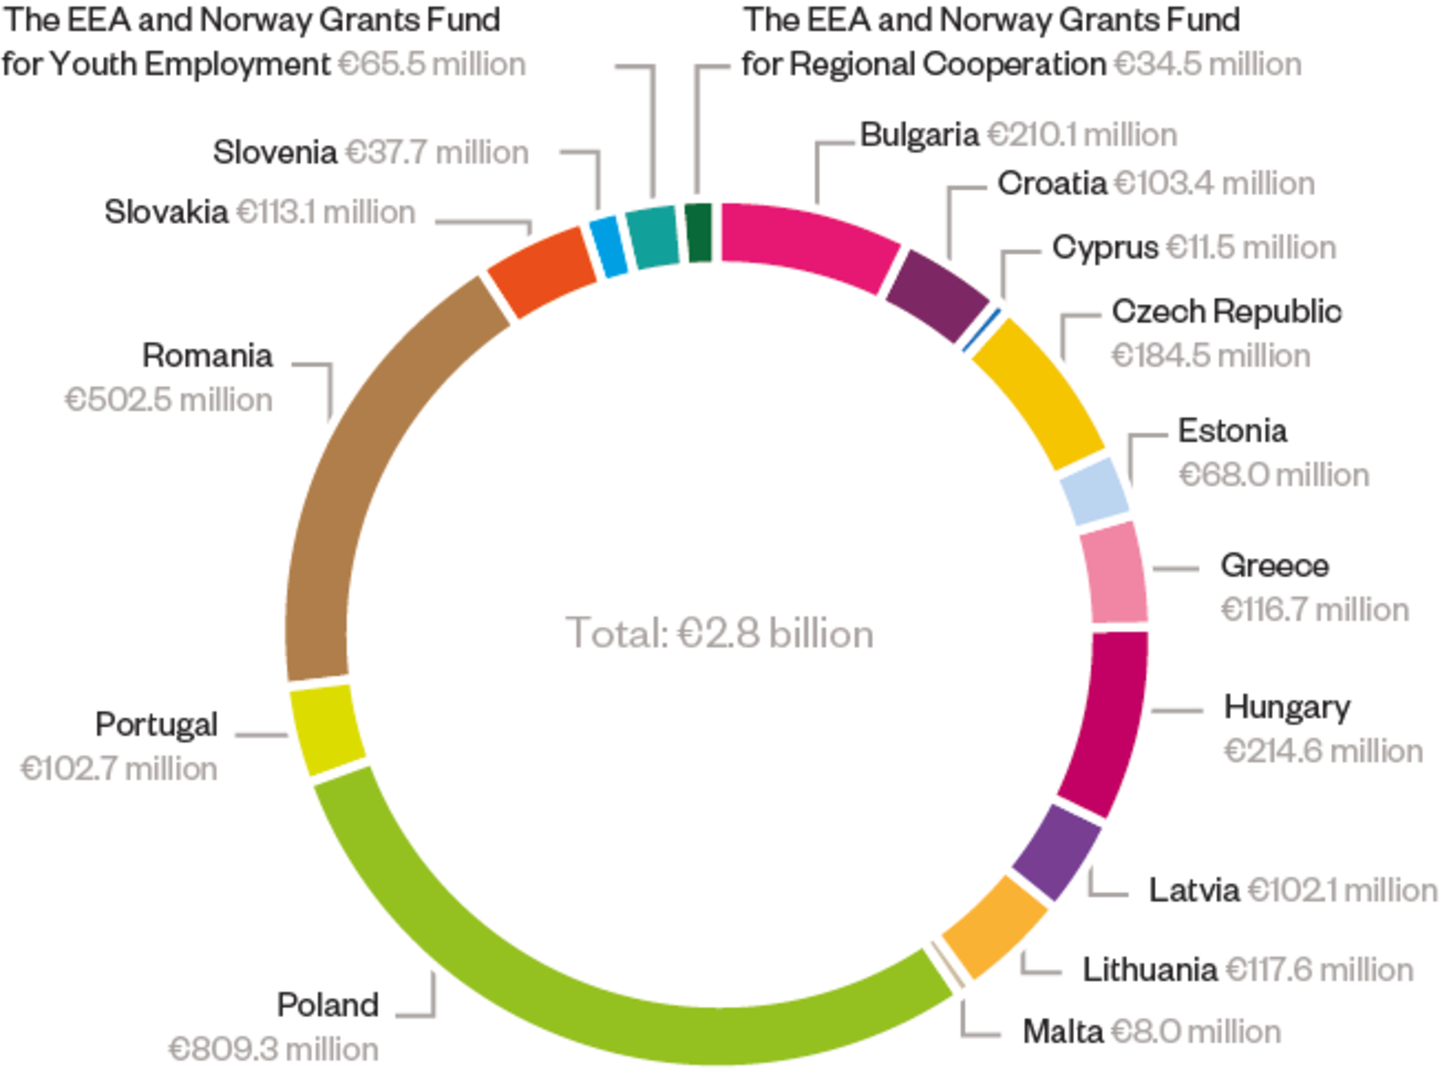 A pie chart illustrating the total EEA and Norway Grants allocation across the 15 beneficiary states